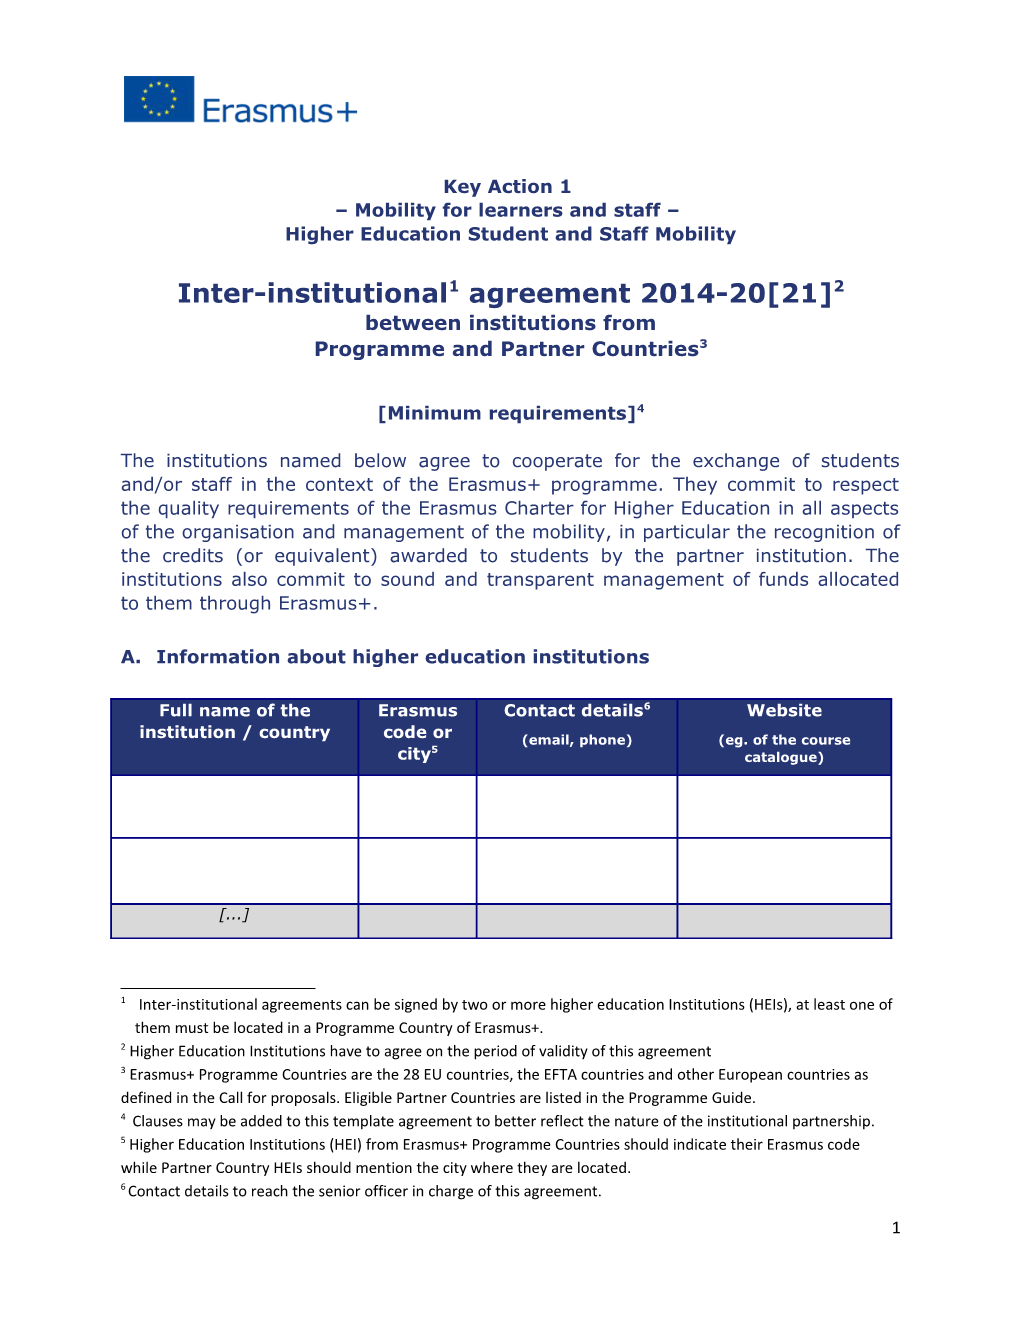 Inter-Institutional 1 Agreement 2014-20 21 2 Between Institutions From